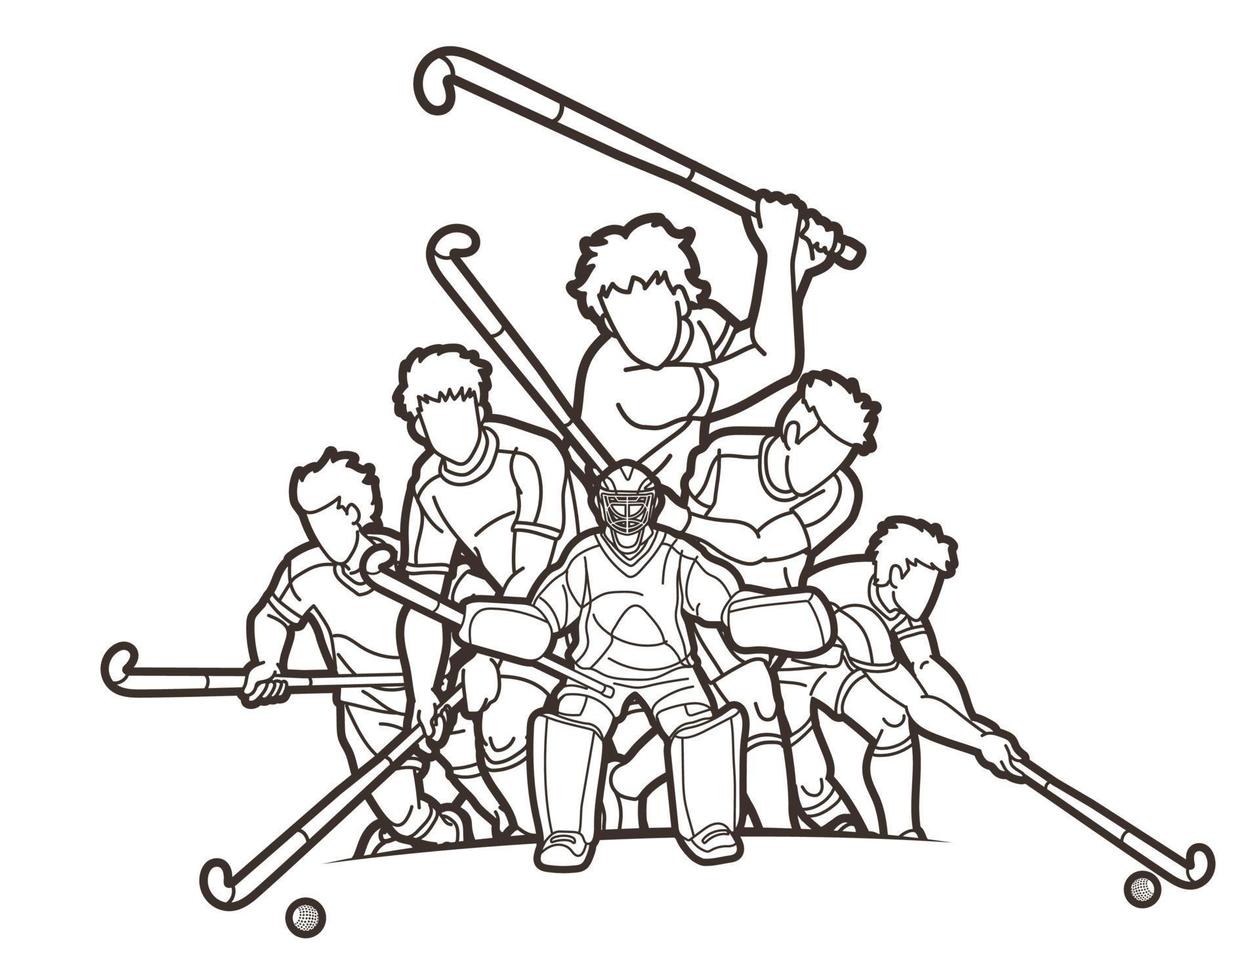 Outline Team Field Hockey Sport Male Players vector